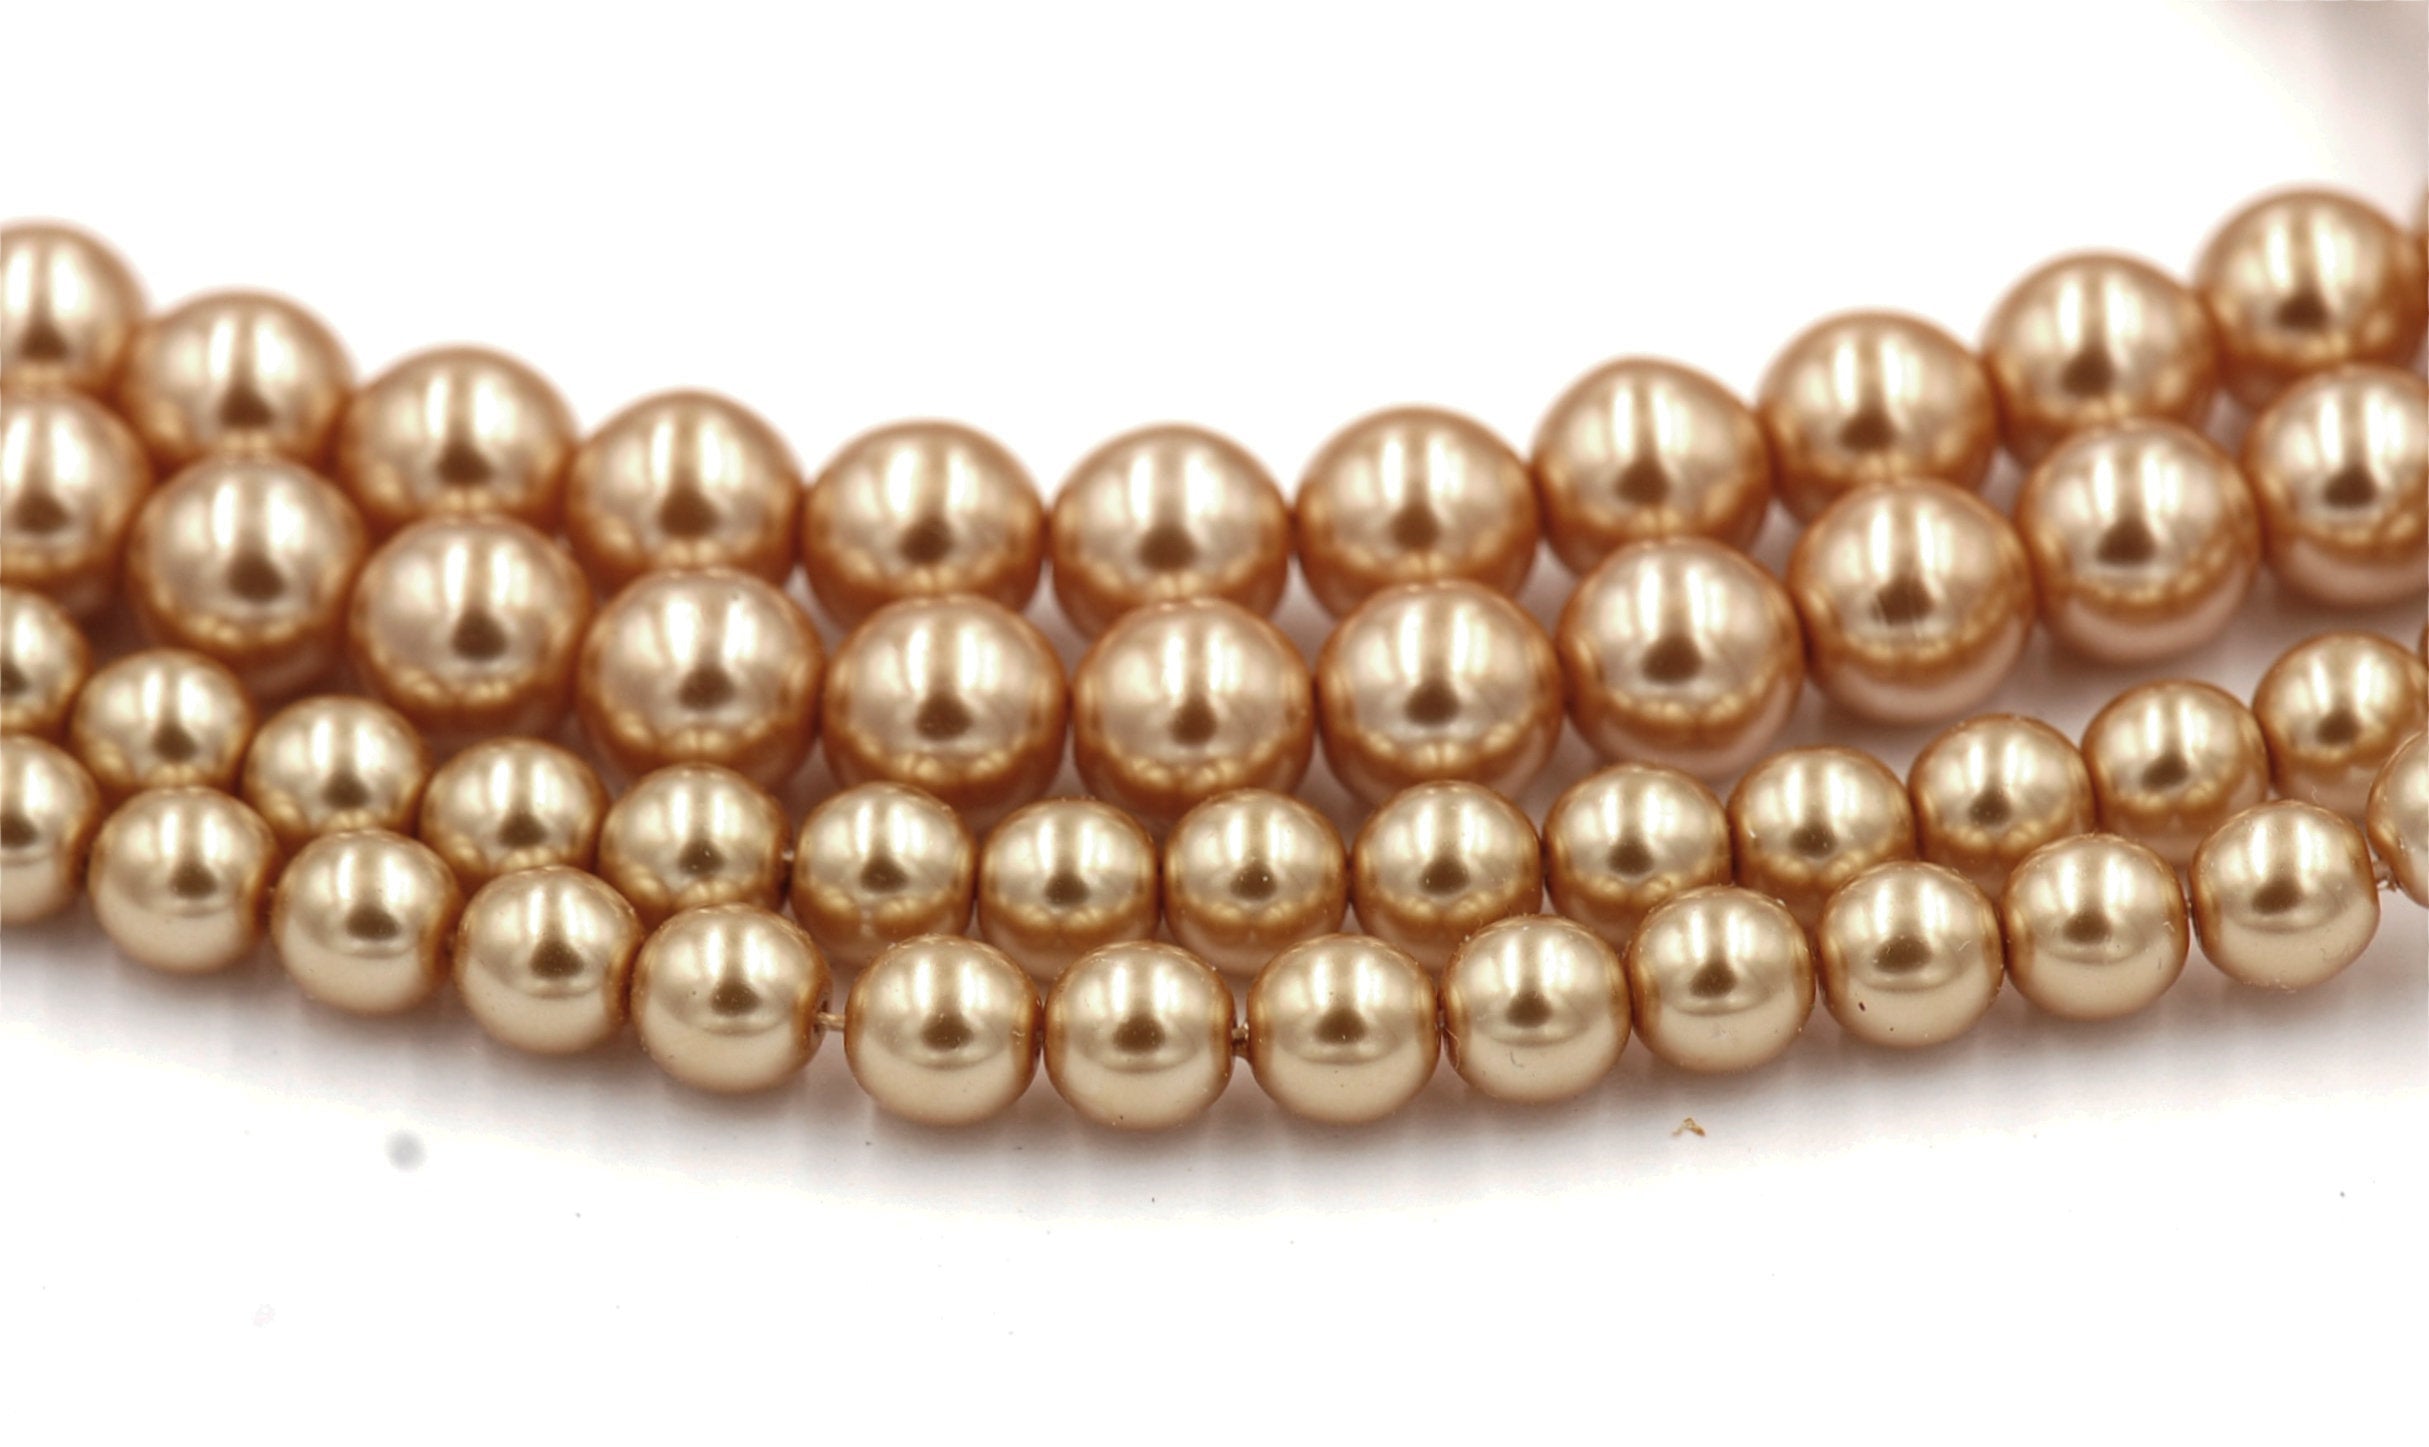 Czech Glass Pearl Coated Golden Champagne Beads 4mm, 6mm, 8mm